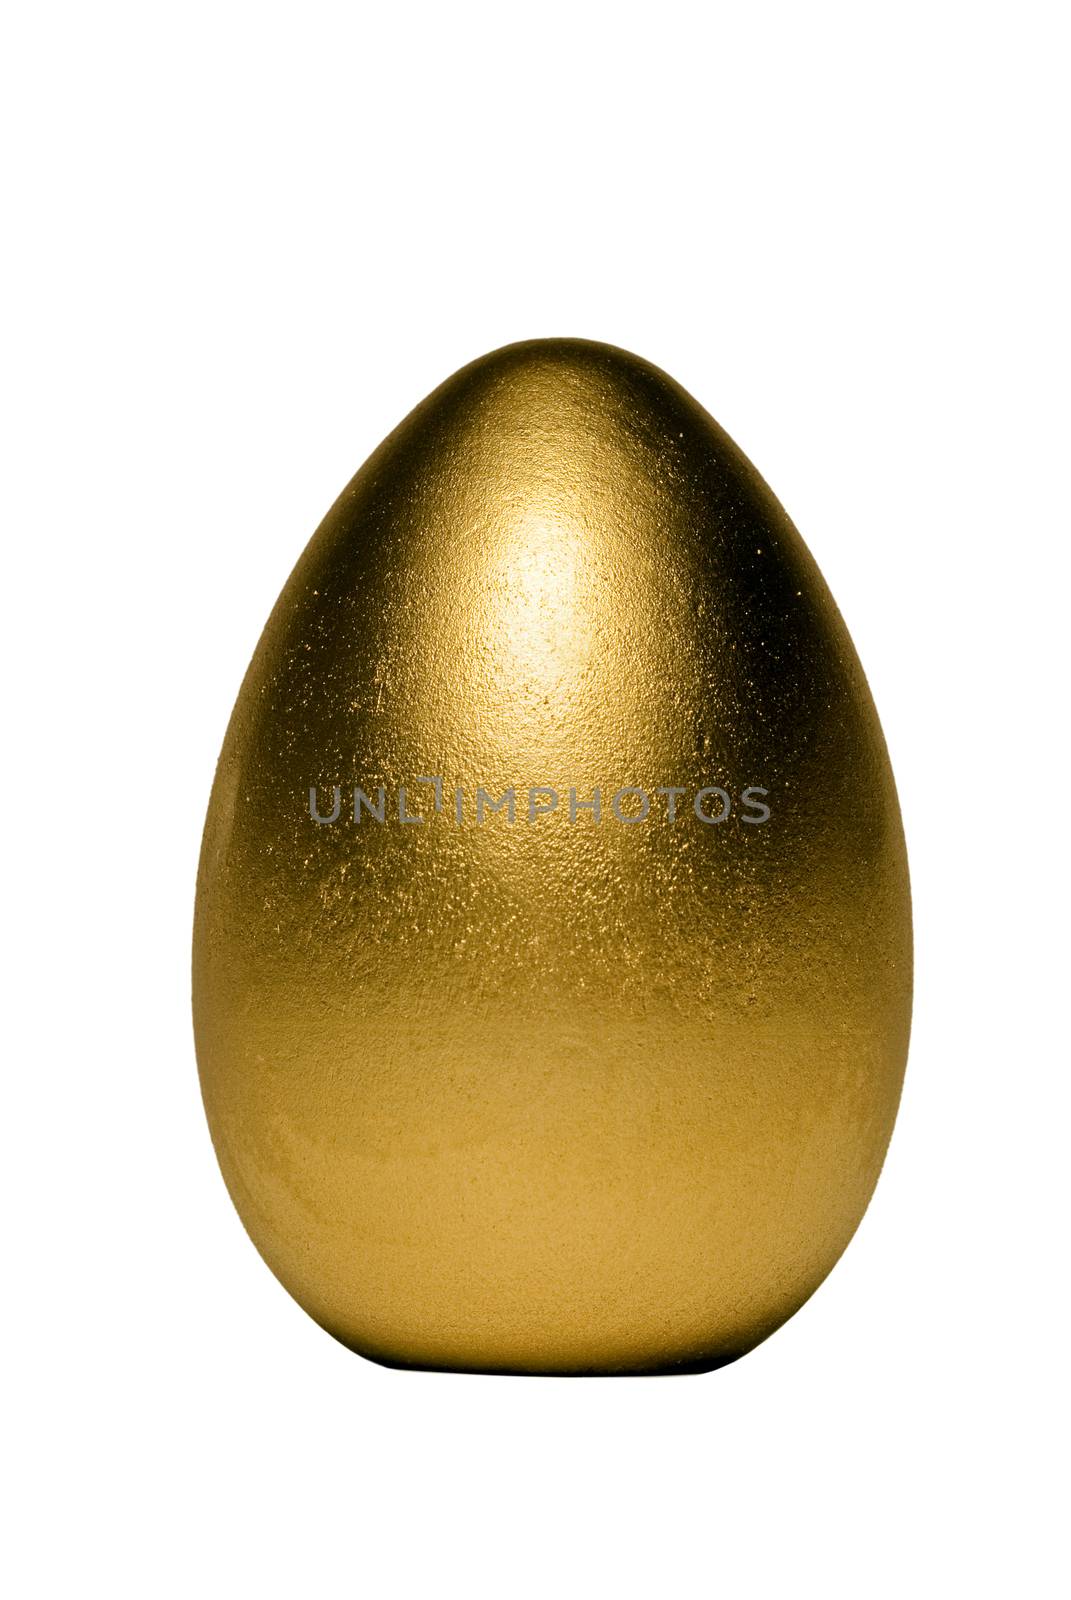 A version of a golden egg.  Macro shot.  Isolated on white.